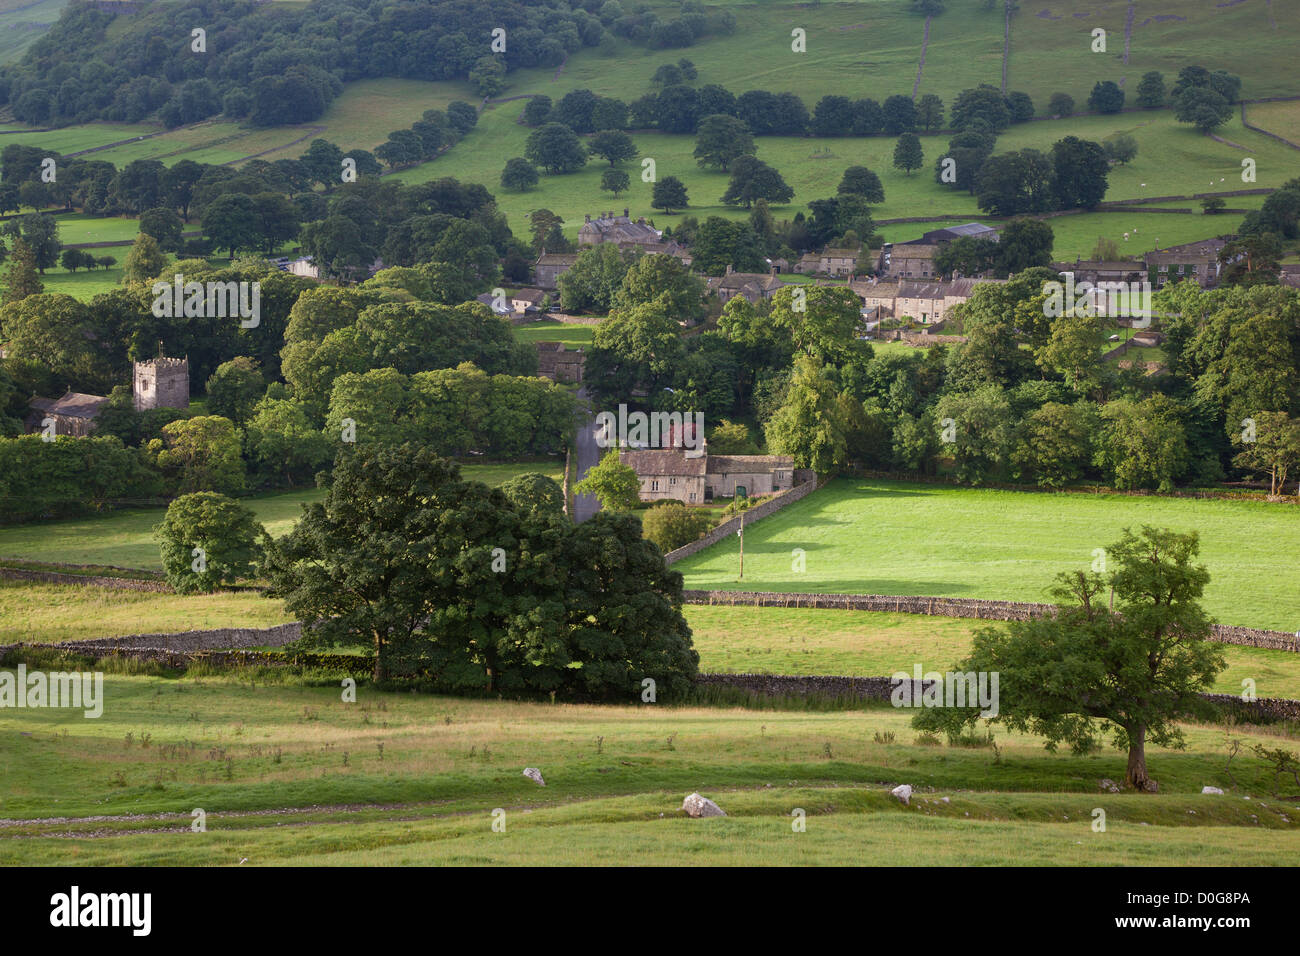 Arncliffe village, Littondale in The Yorkshire Dales, UK Stock Photo